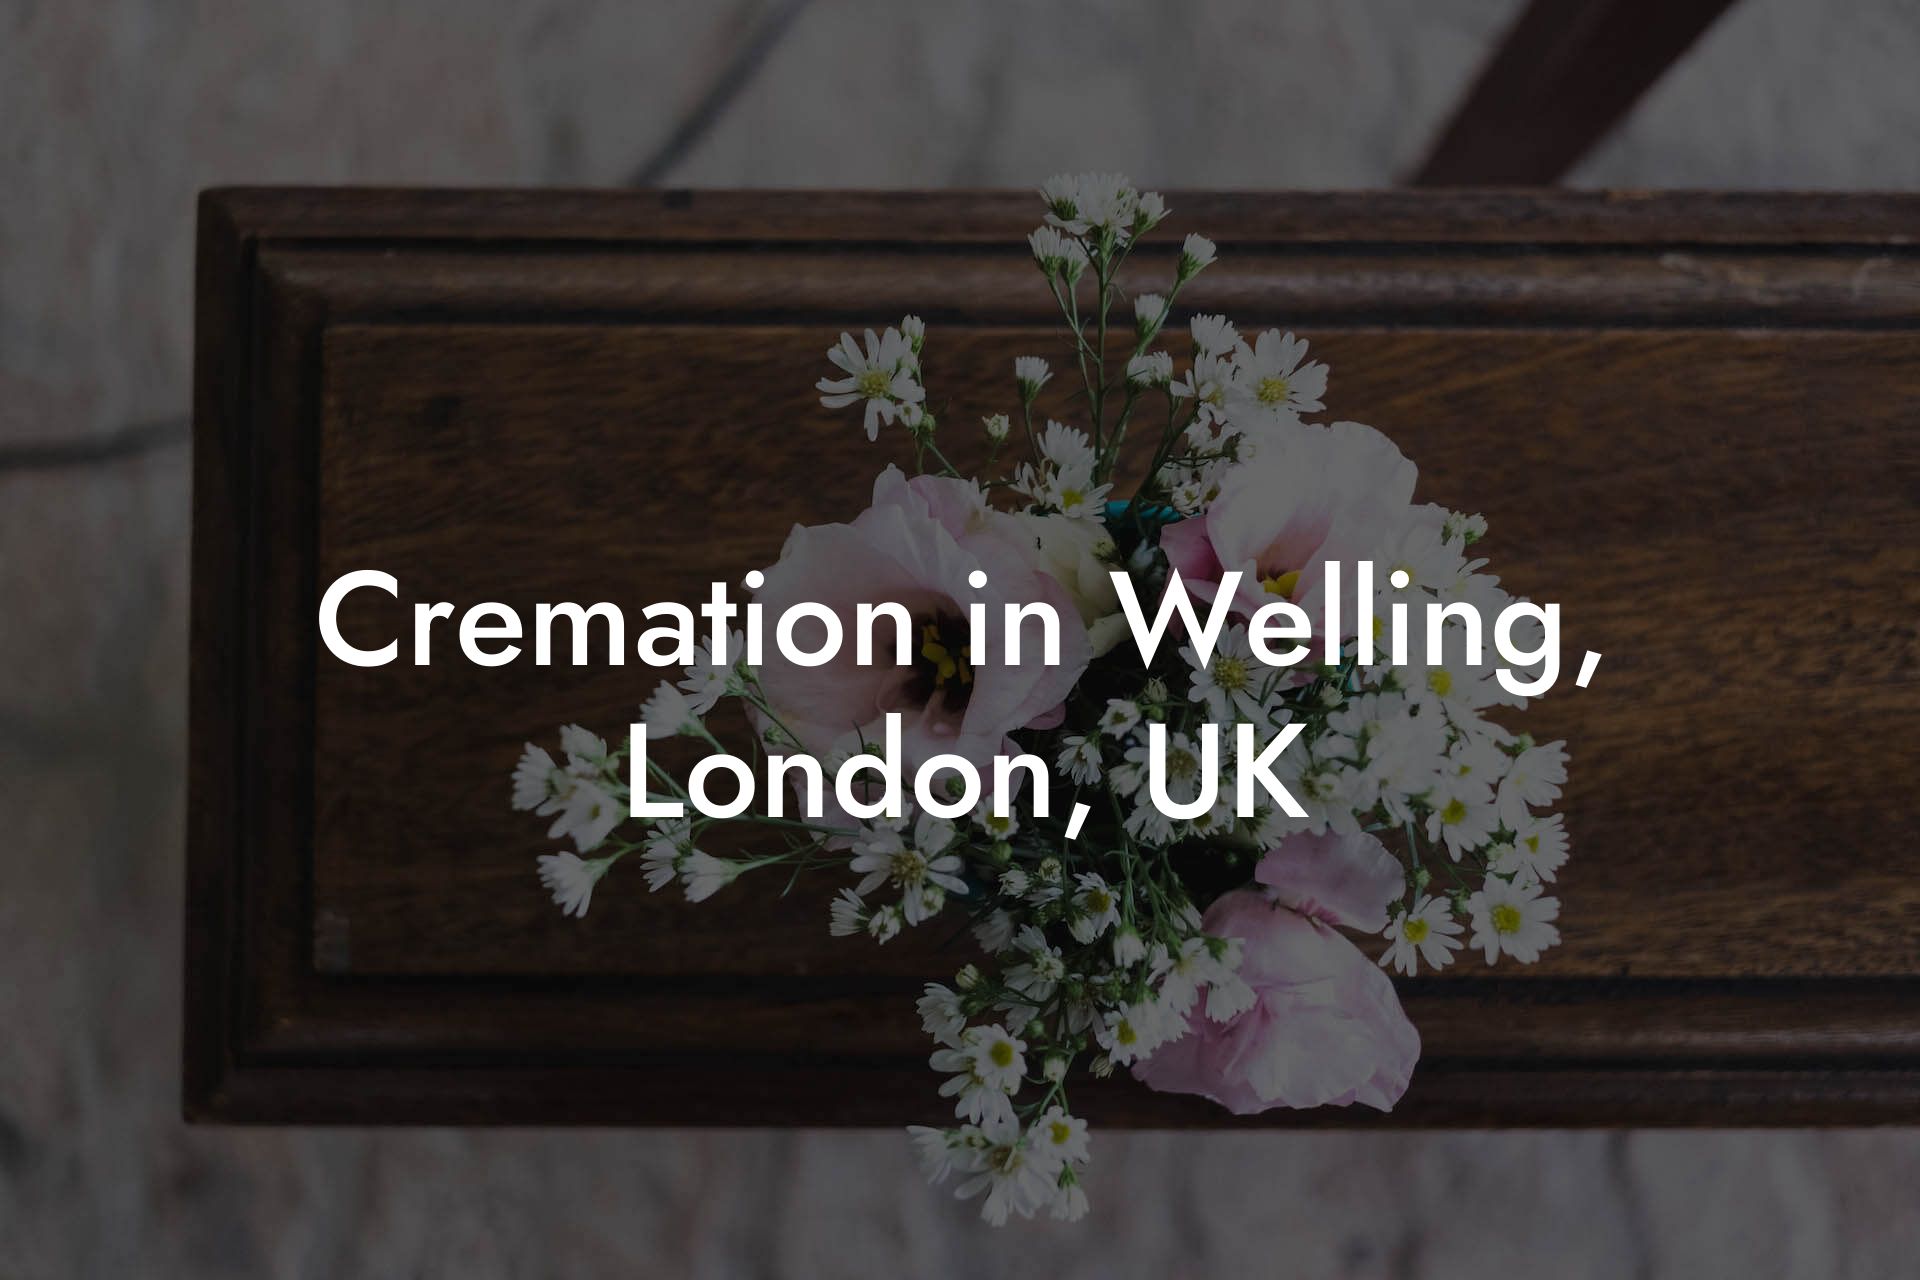 Cremation in Welling, London, UK